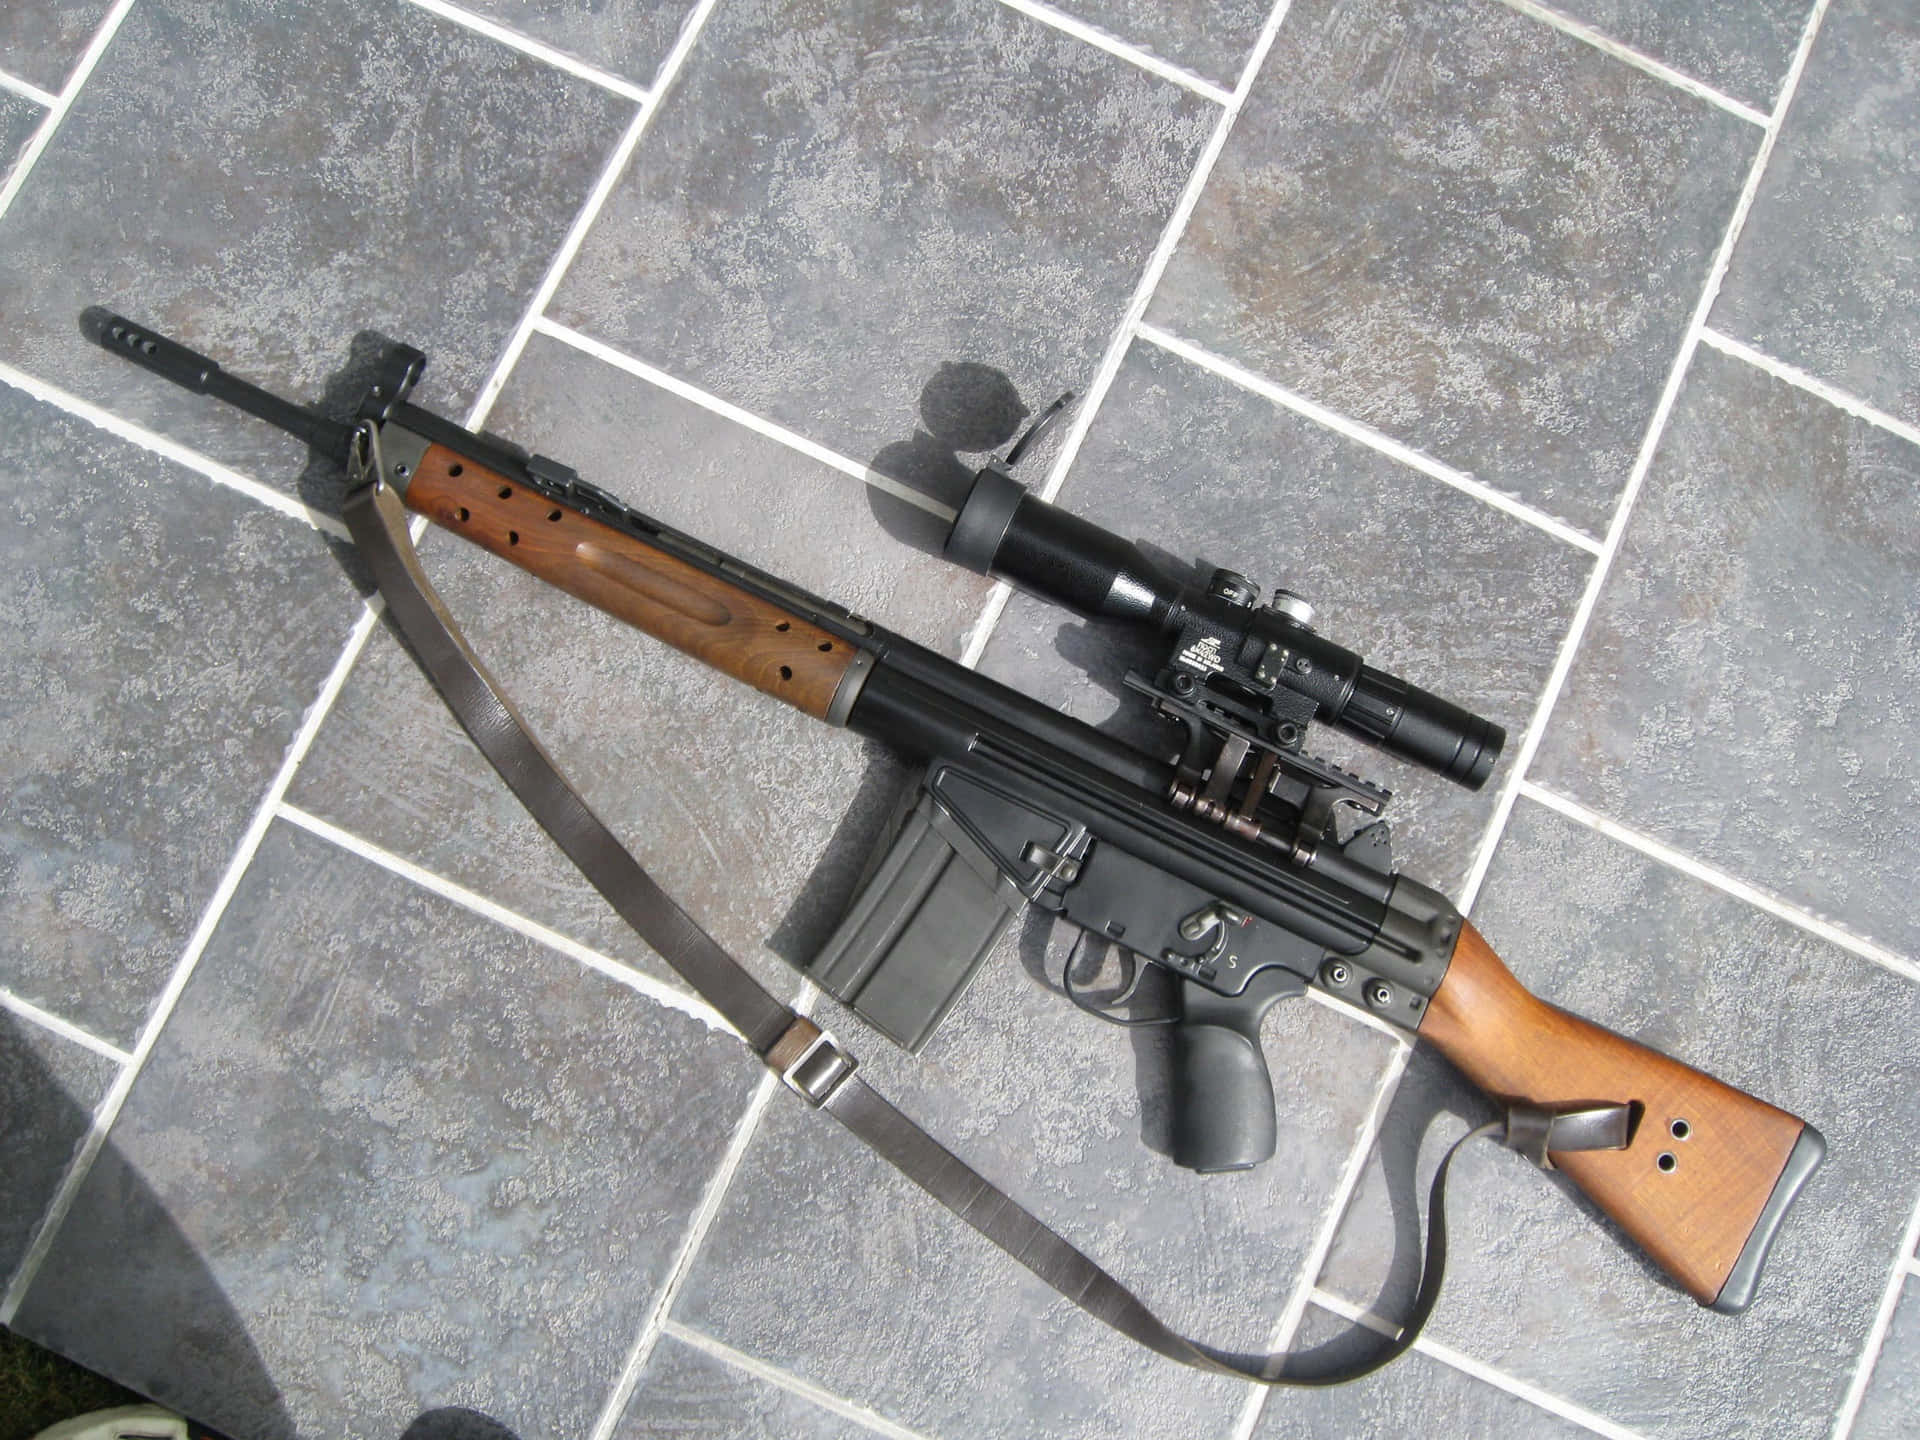 A Rifle With A Scope And A Wooden Handle